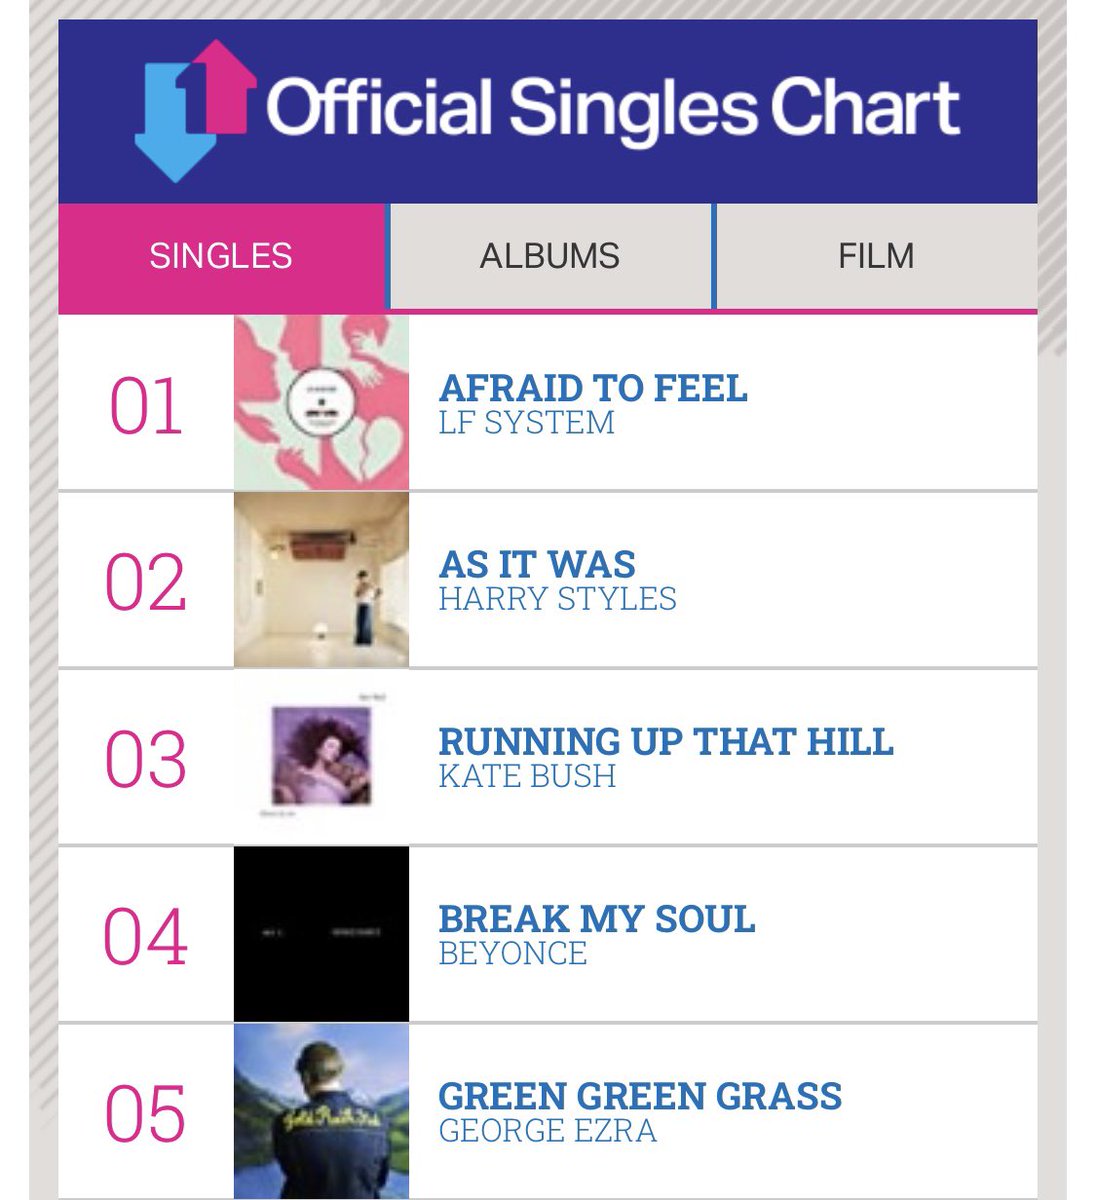 Full rejoicing that I’m singing on the No. 1 track, #afraidtofeel by @LFSYSTEMMUSIC that’s gone viral and is No. 1 in the @officialcharts .. woohoo, well done all involved, @HalRitsonn @robharris @RichardAdlam